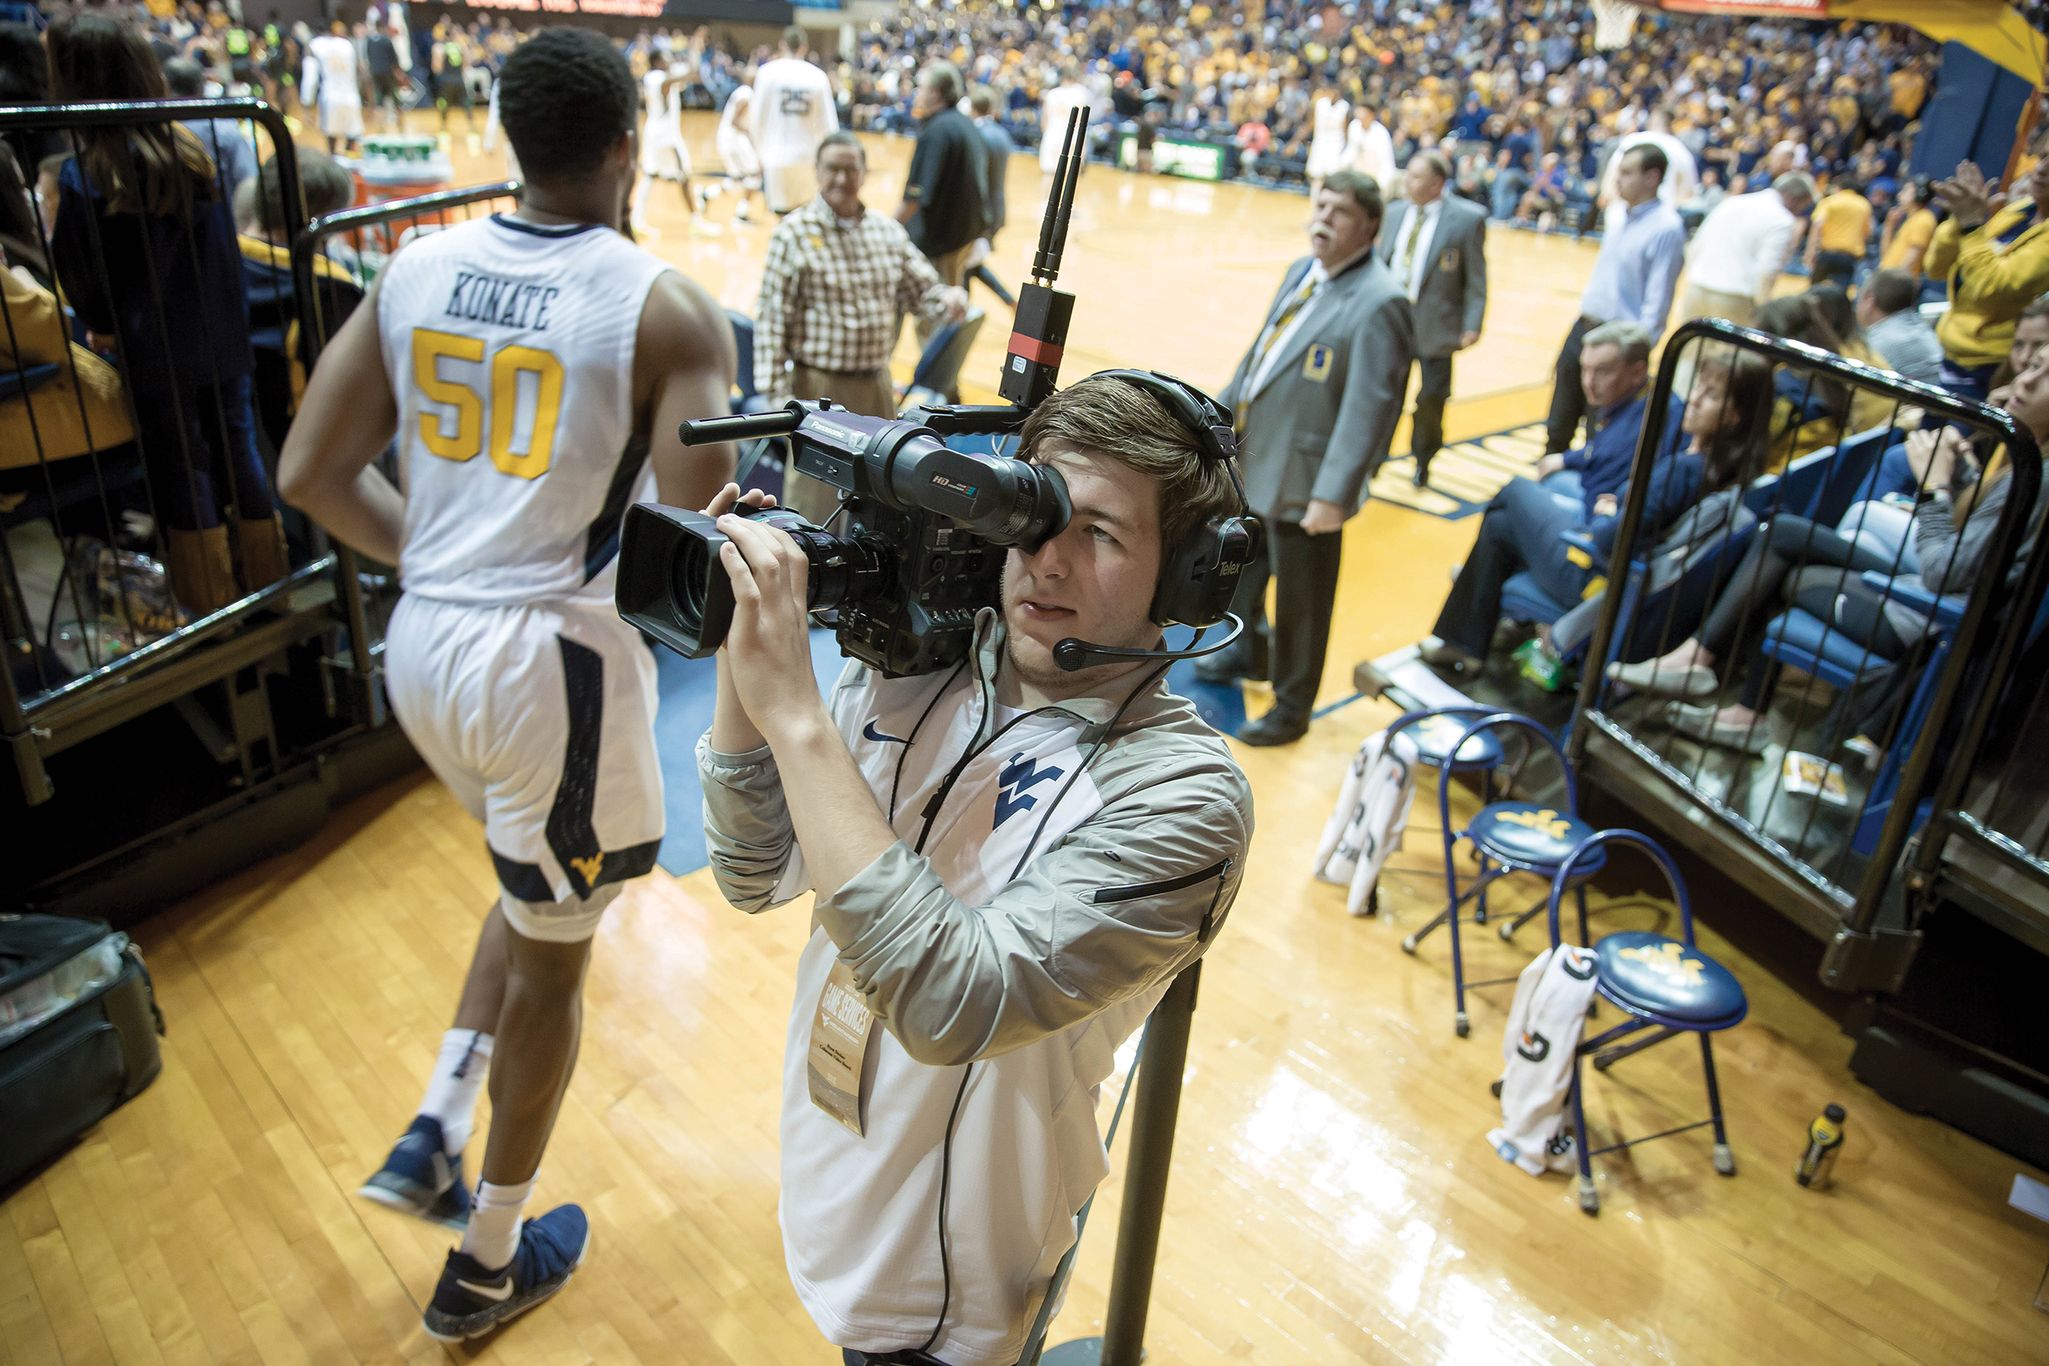 Student operating camera for WVU men's basketball